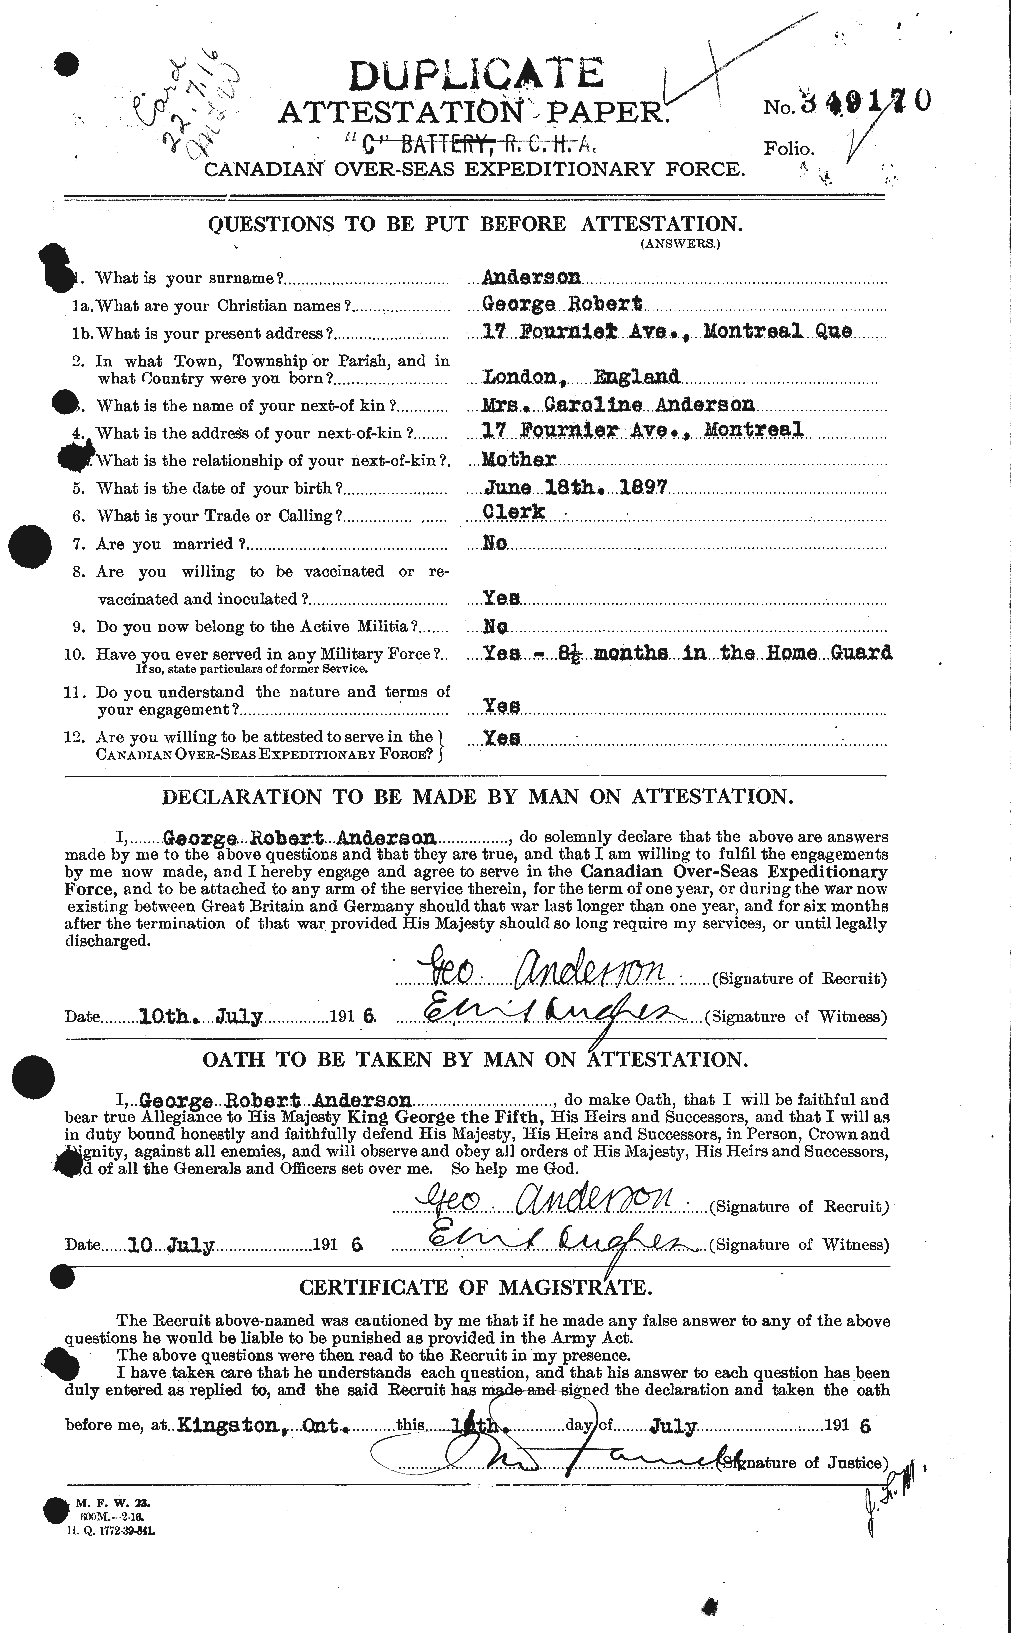 Personnel Records of the First World War - CEF 209700a